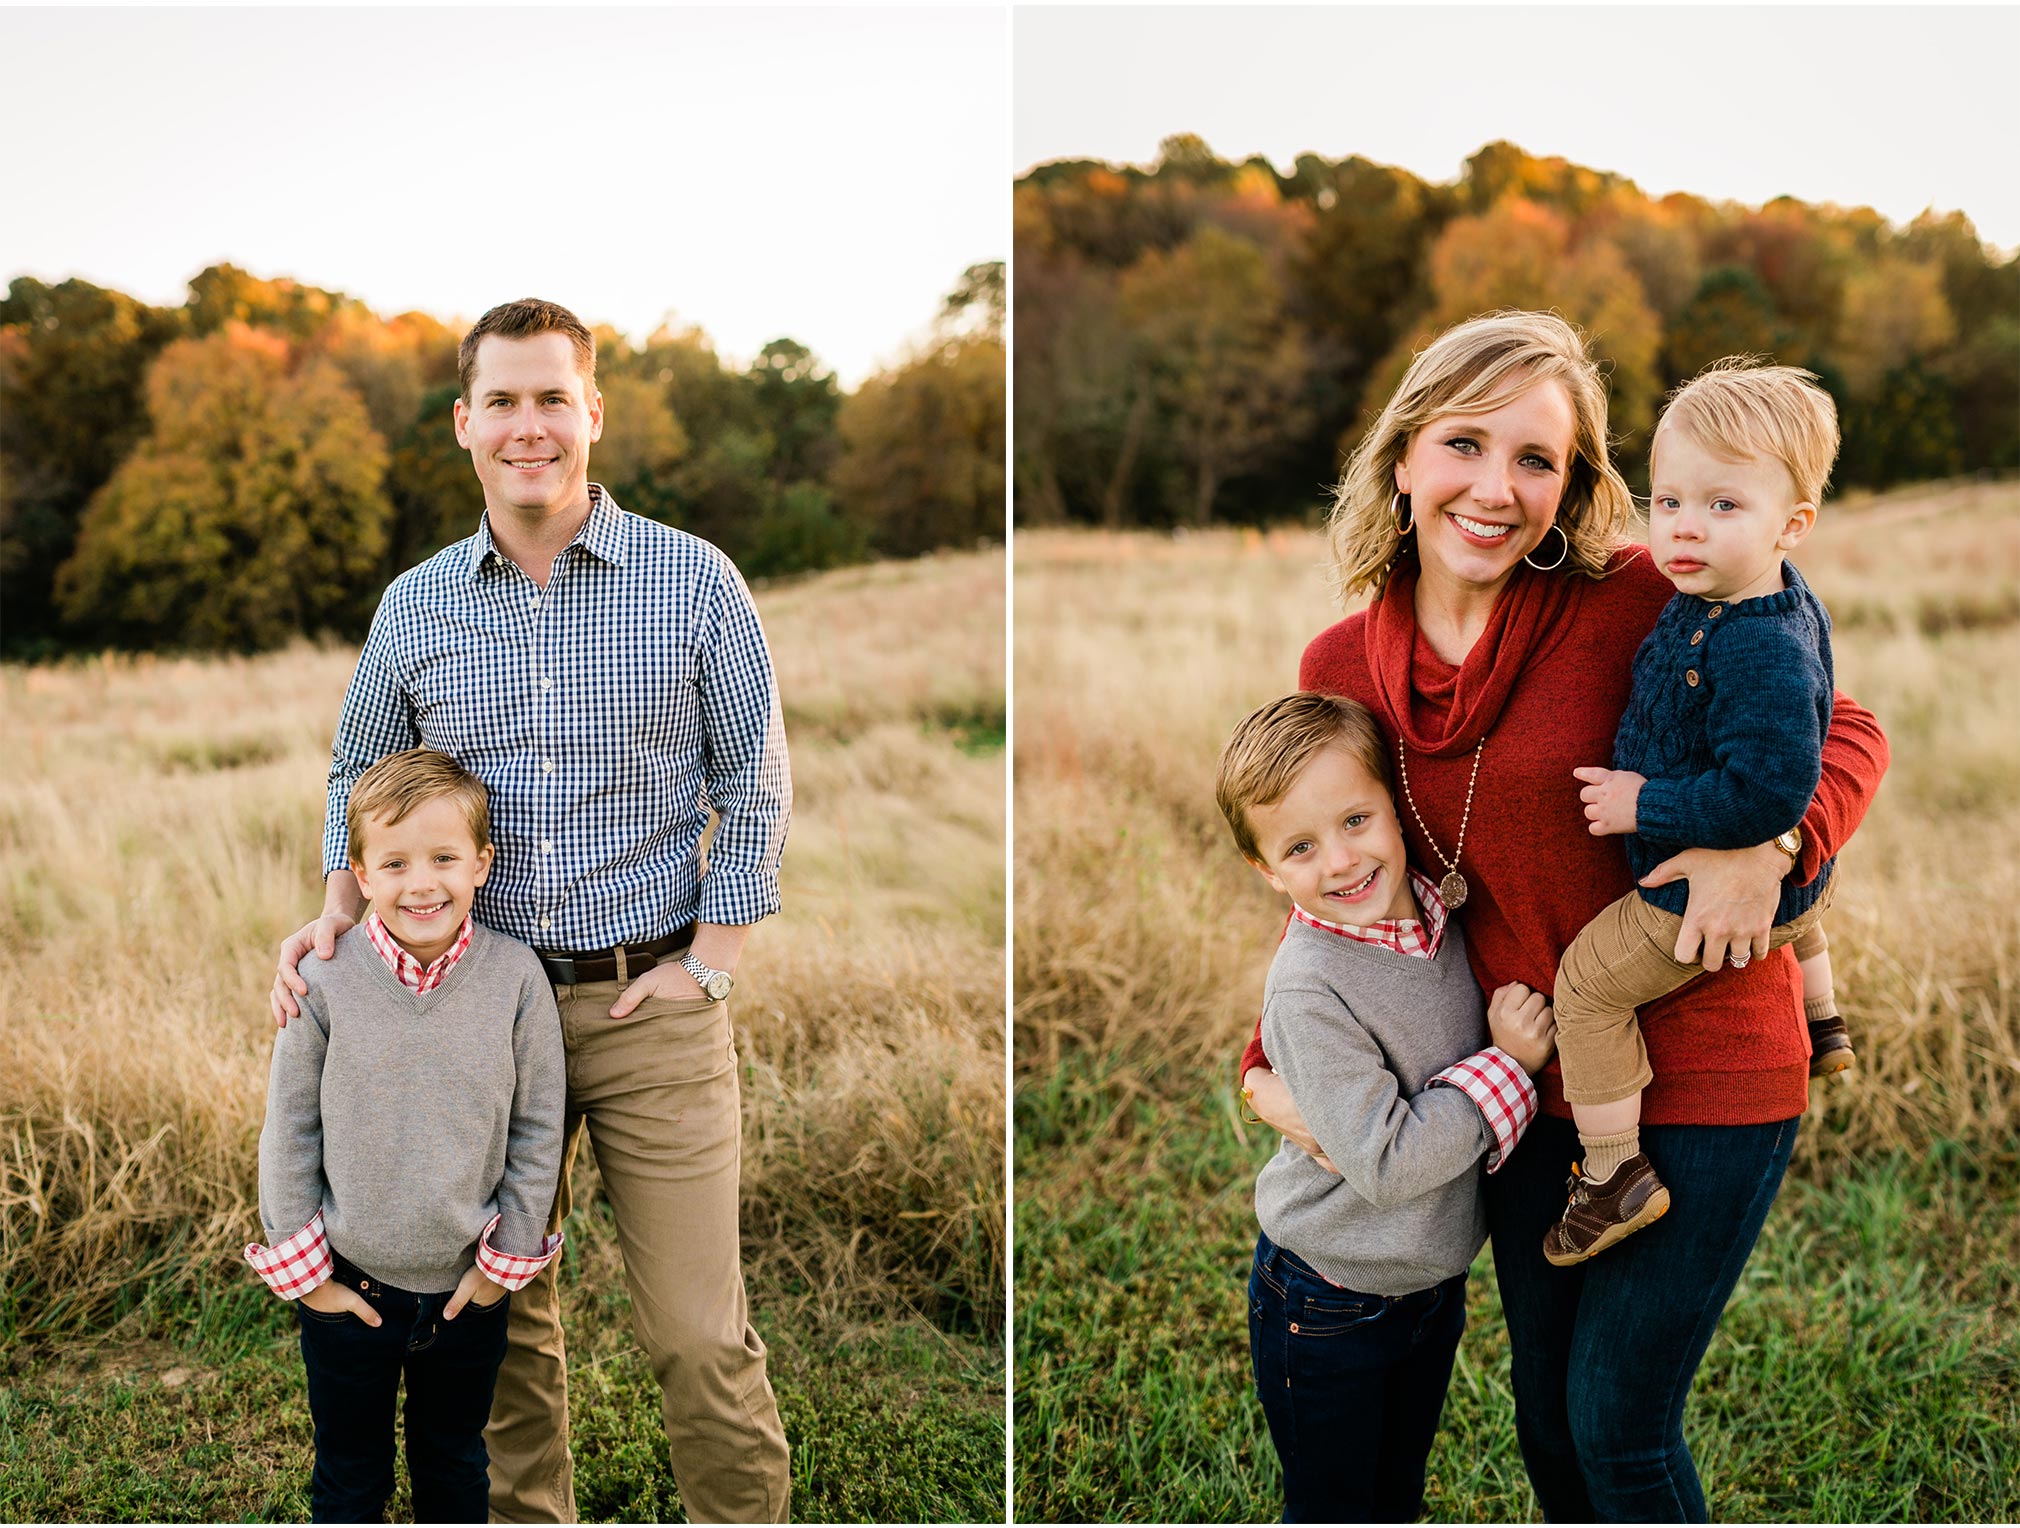 Family portraits at NC Museum of Art | Raleigh Family Photographer | By G. Lin Photography